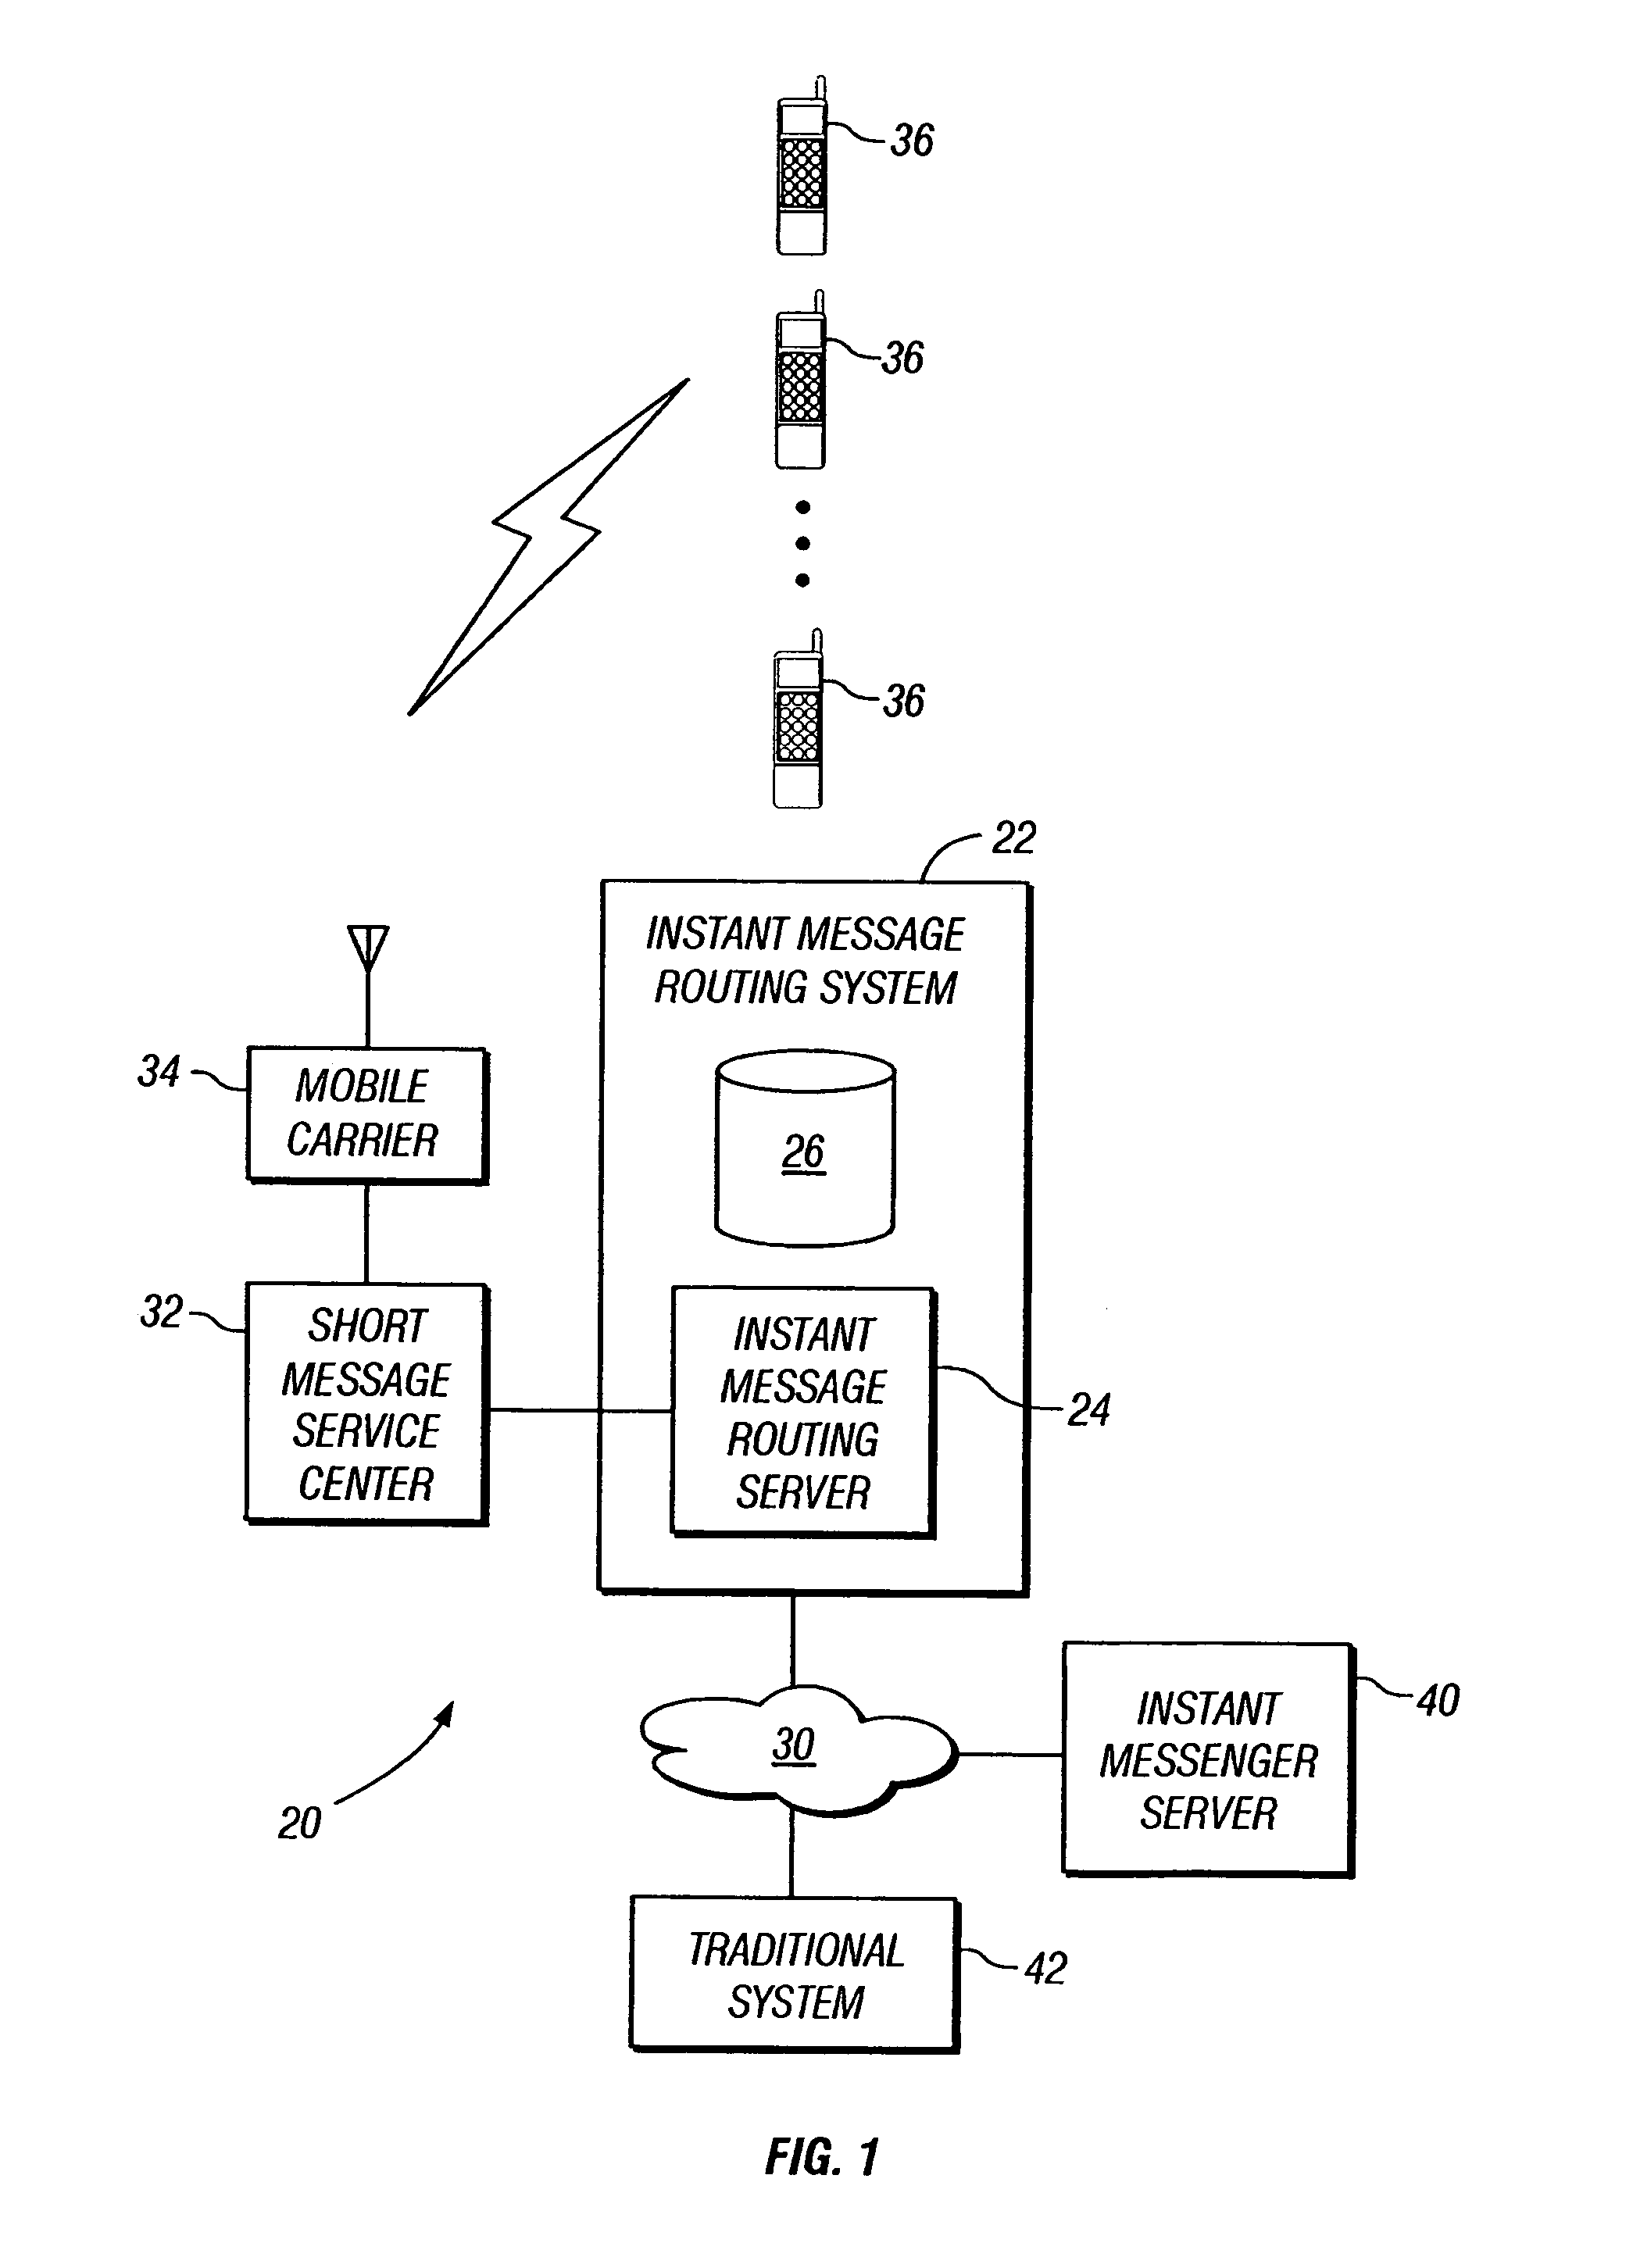 Facilitating messaging between a mobile device and a user